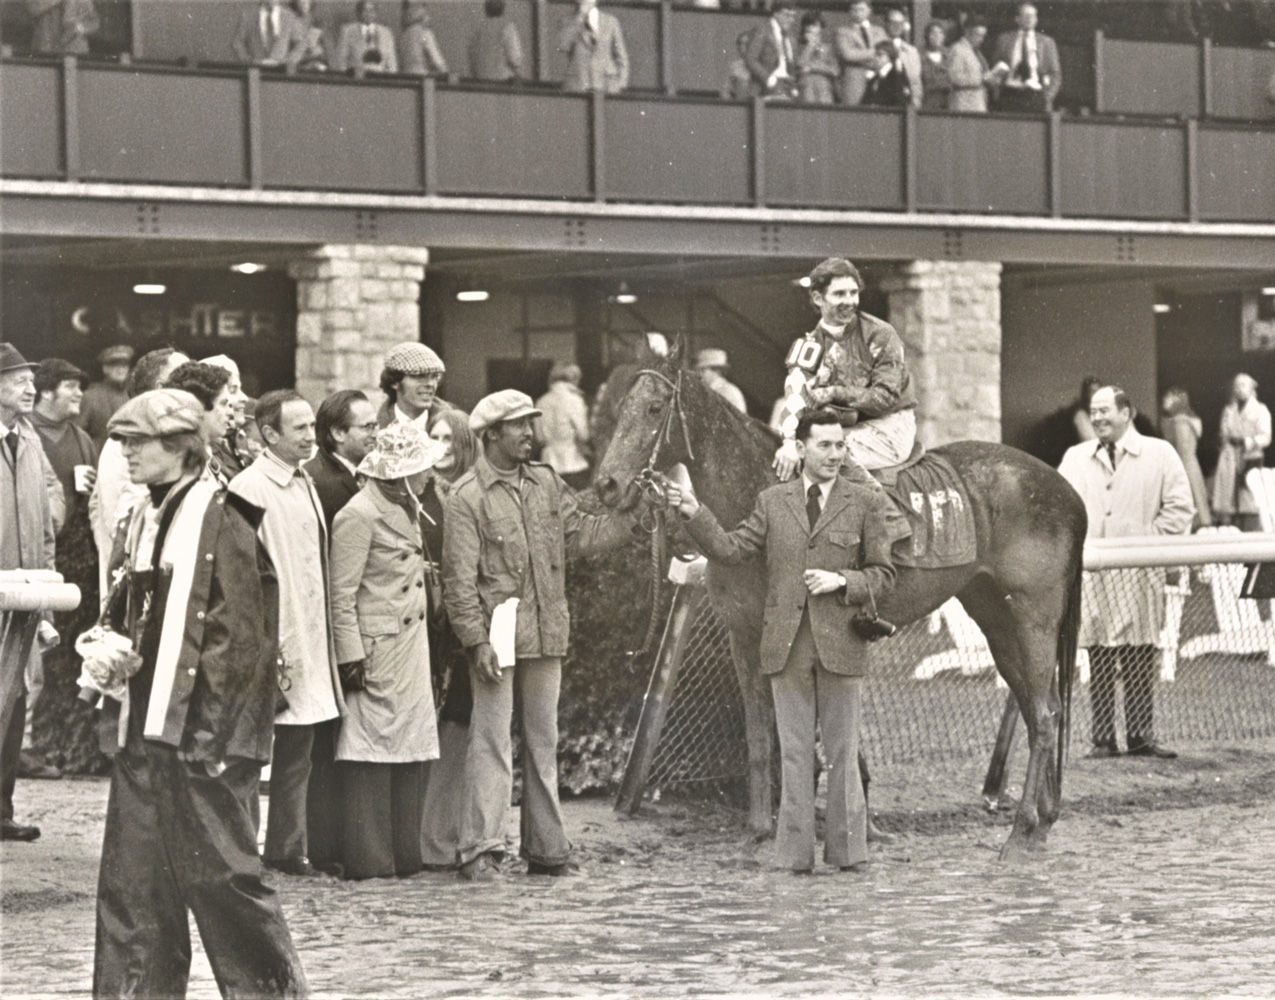 Craig Perret and Optimistic Gal in the winner's circle fro the 1976 Spinster (Keeneland Association)